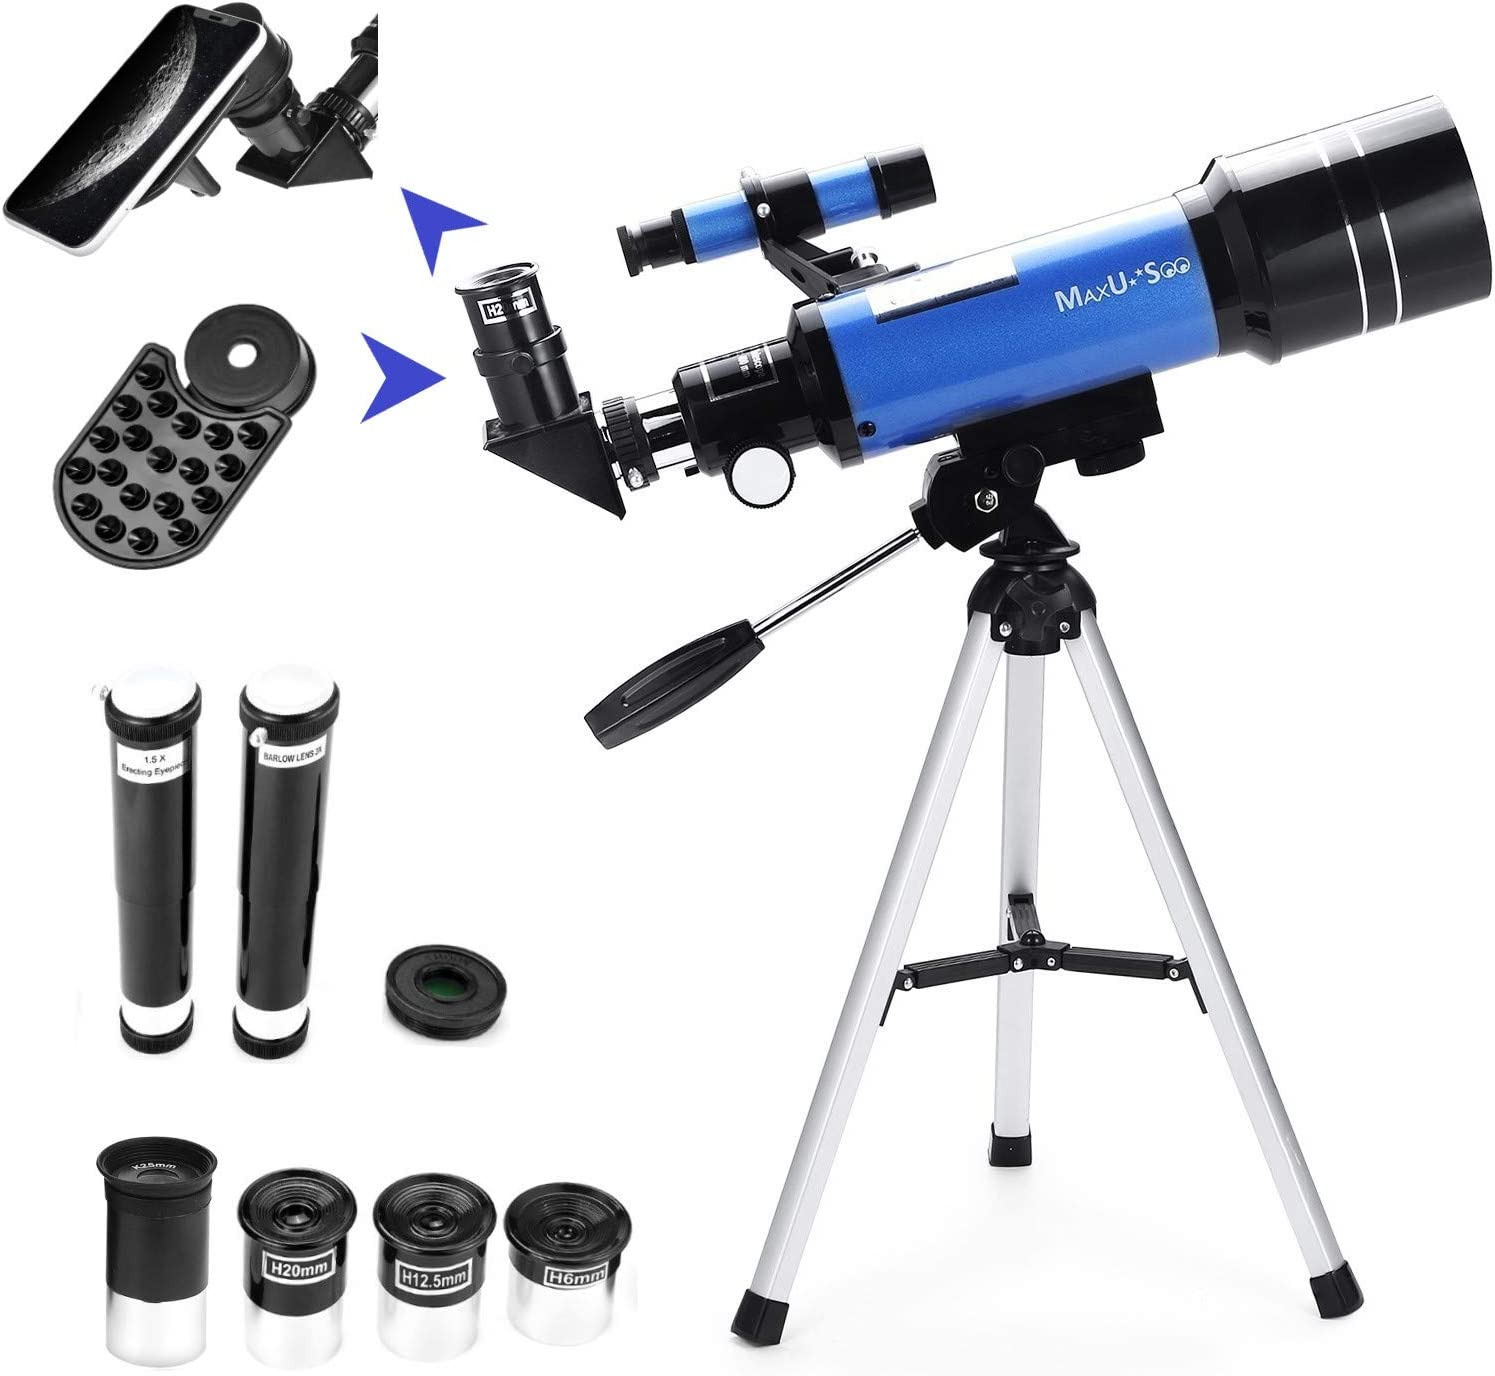 MaxUSee 70mm Telescope - Tripod, Finder Scope, Phone Adapter - 4 Magnification